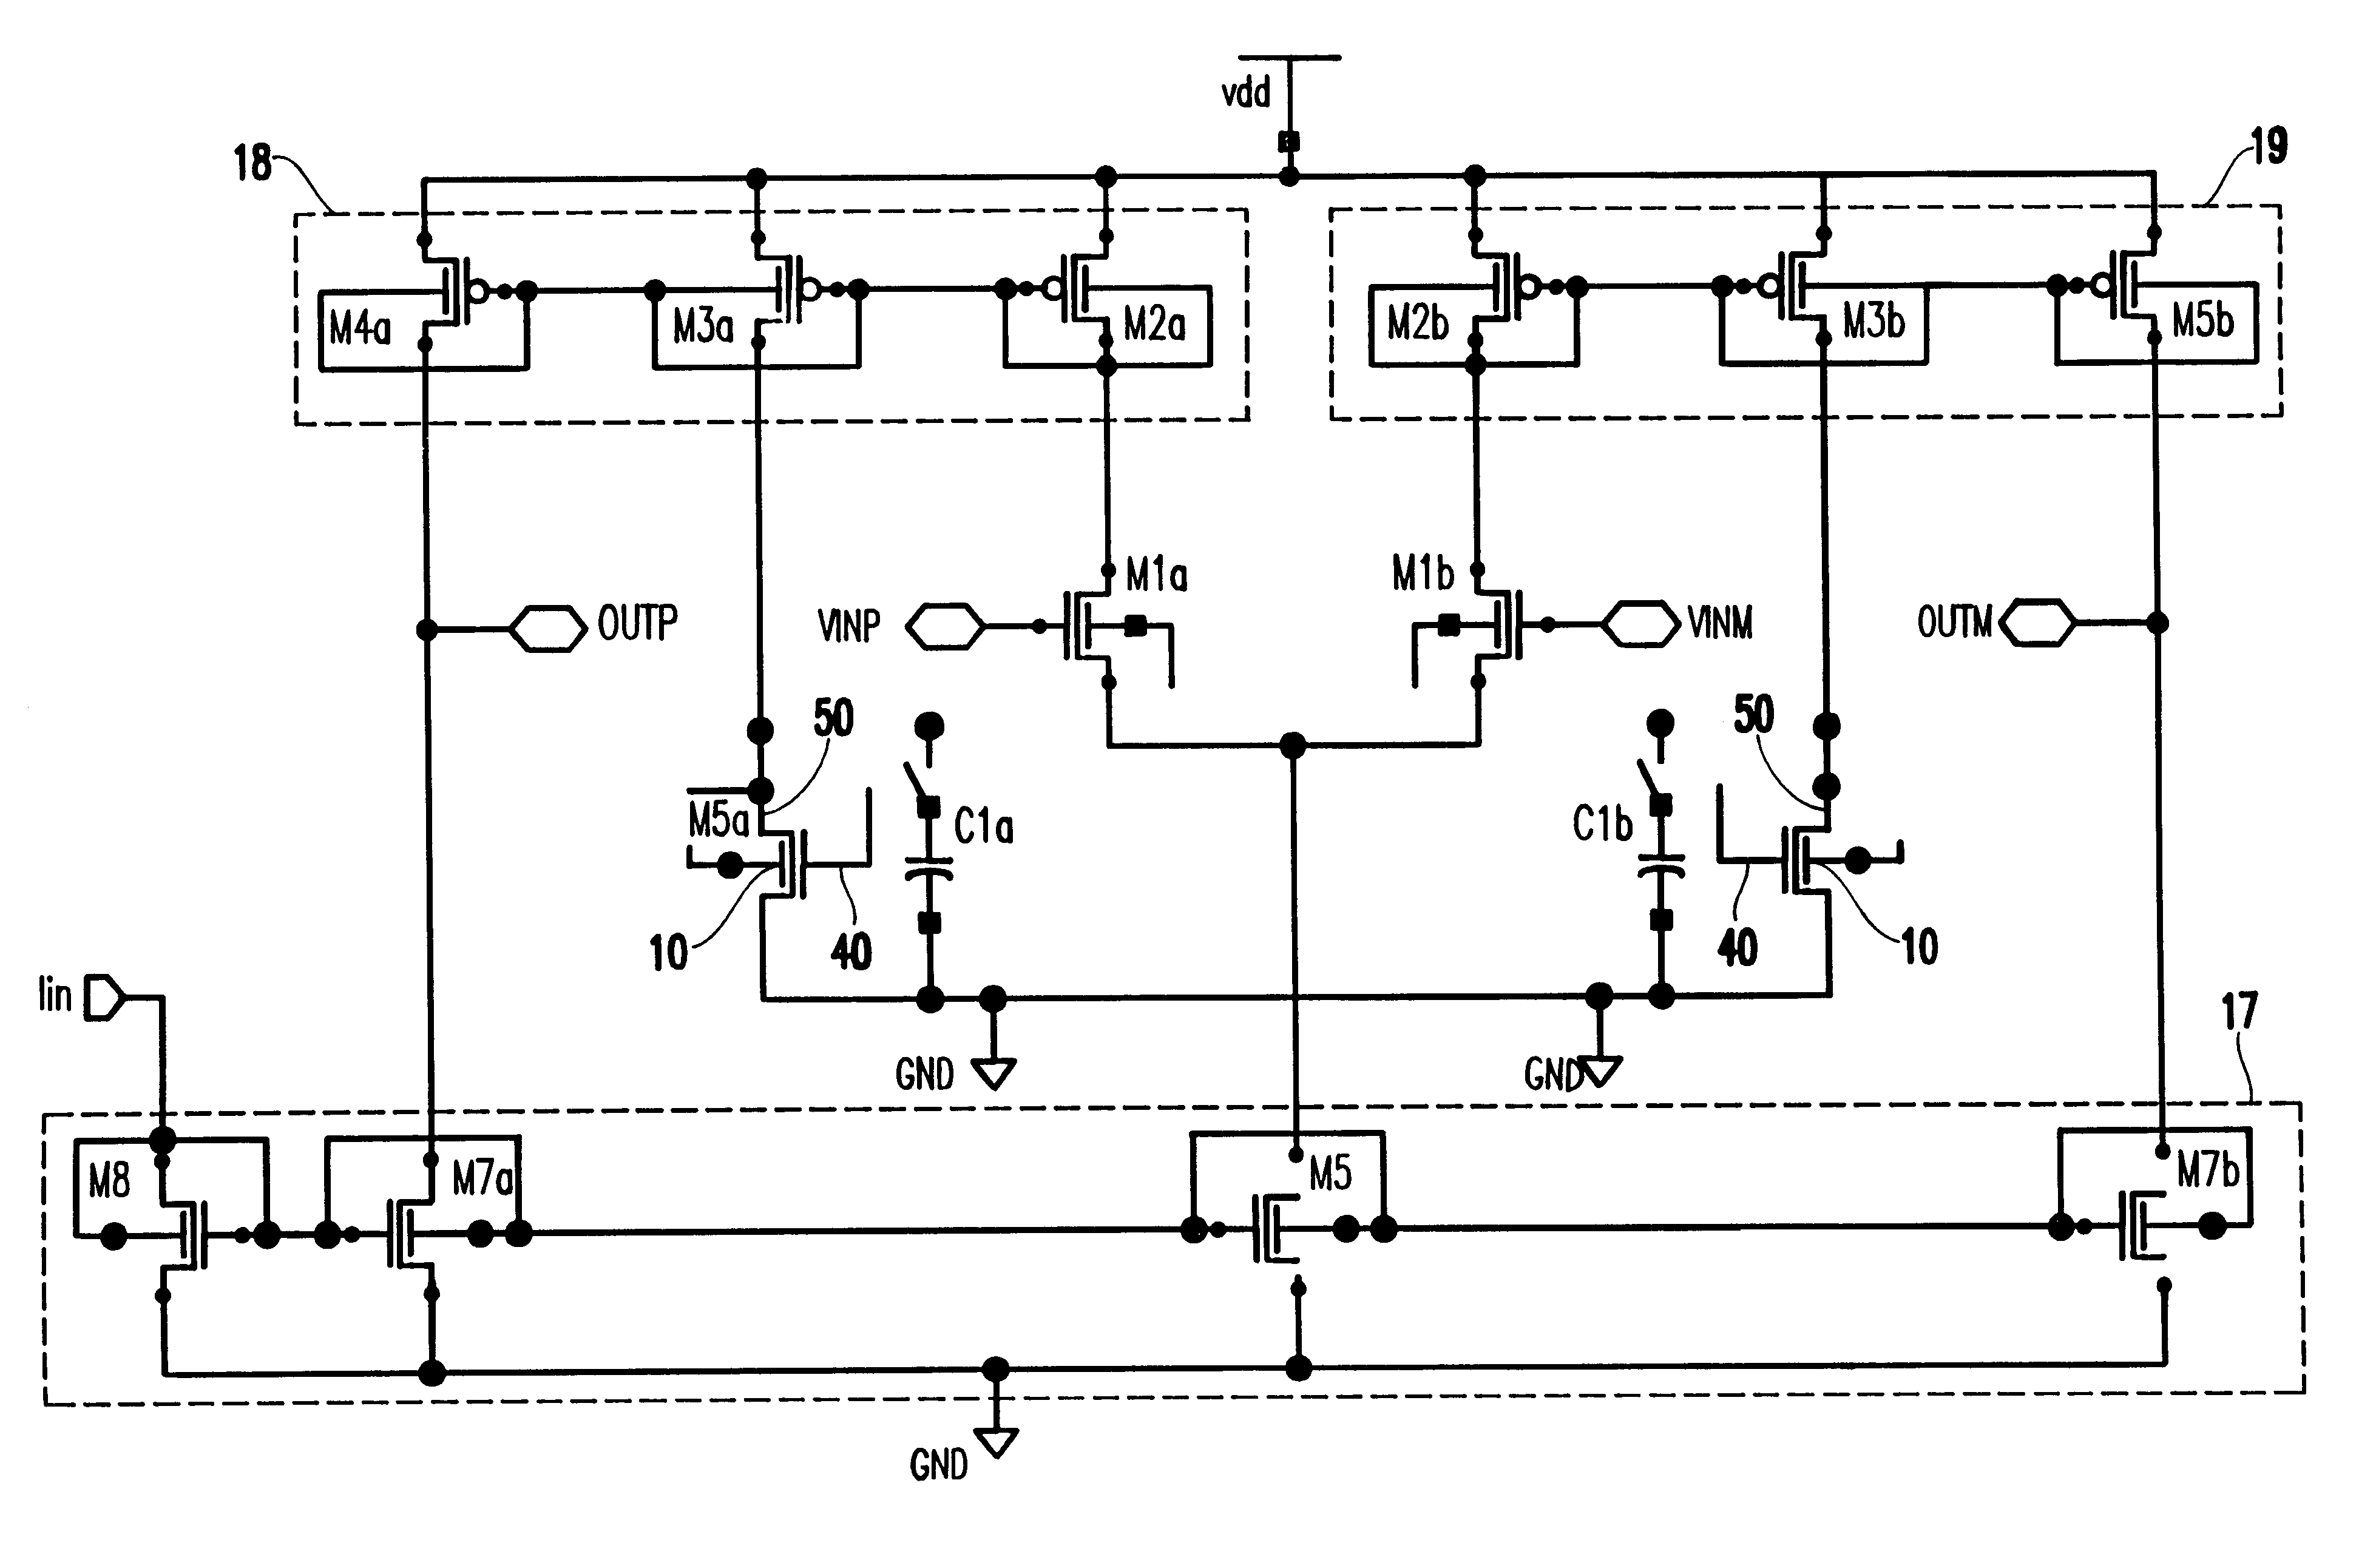 Family of analog amplifier and comparator circuits with body voltage control